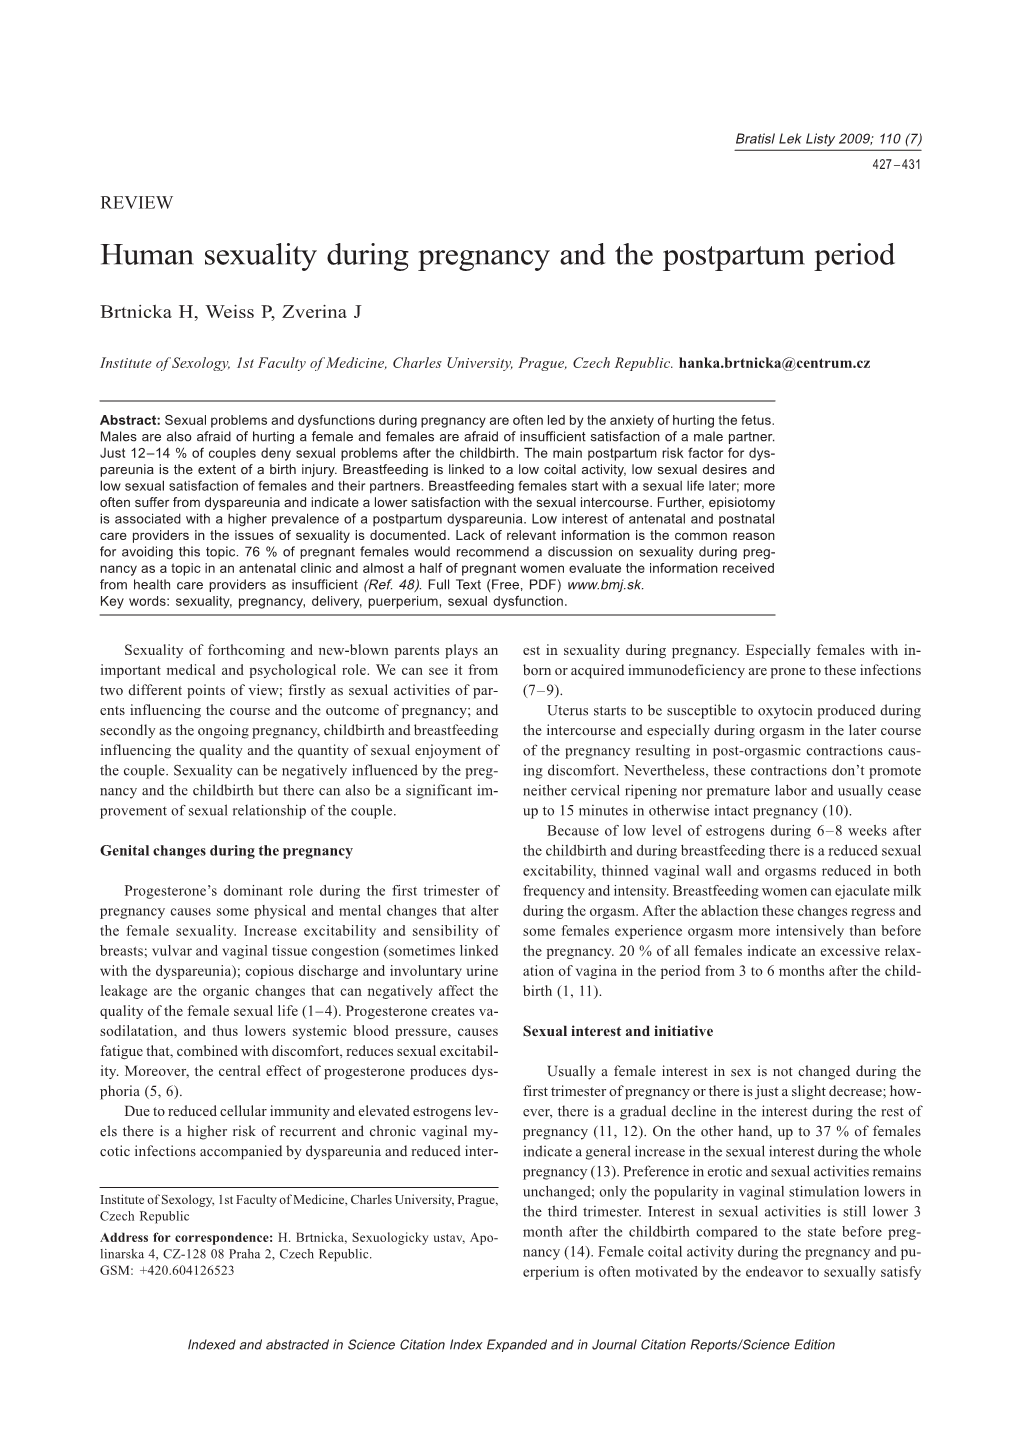 Human Sexuality During Pregnancy and the Postpartum Period